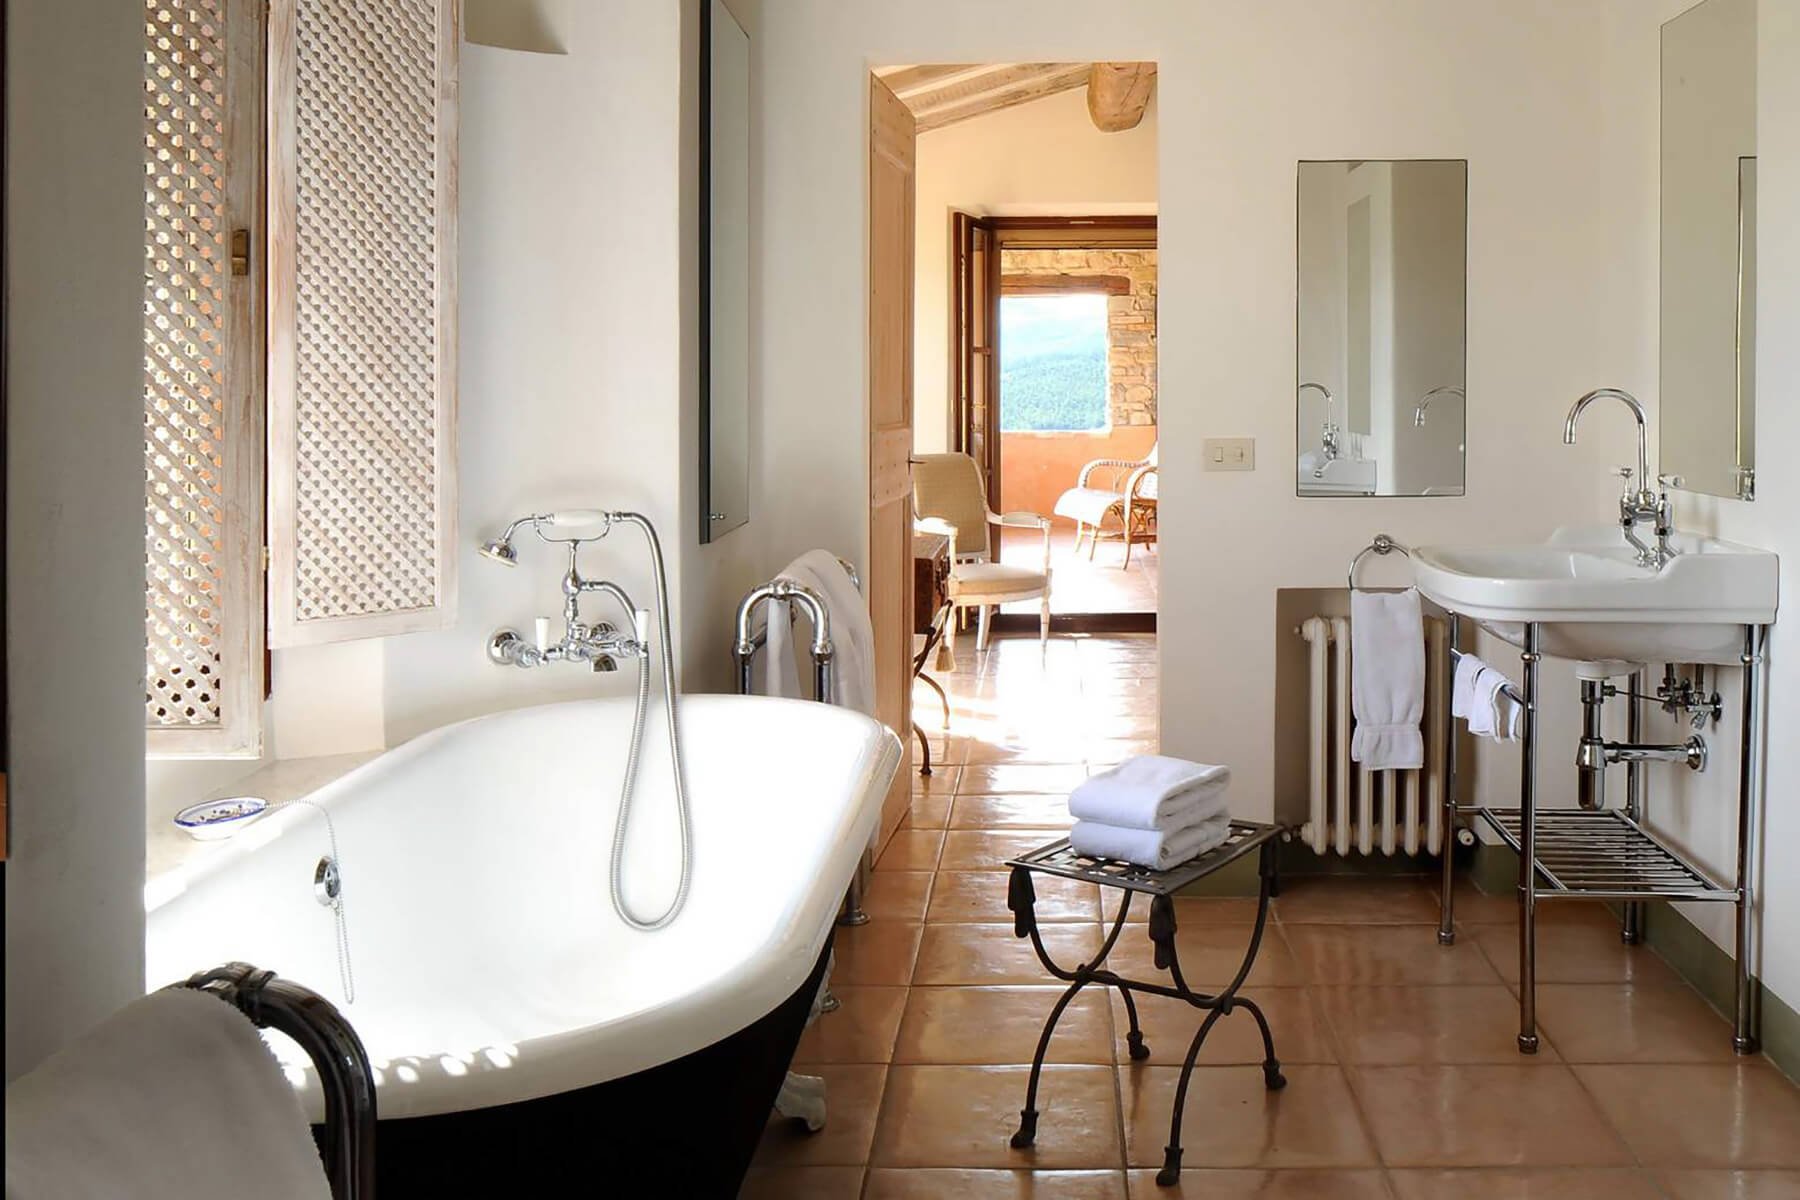 Francis York This Boutique Farmhouse in the Umbrian Hills is Available as a Luxury Villa Rental 6.jpg